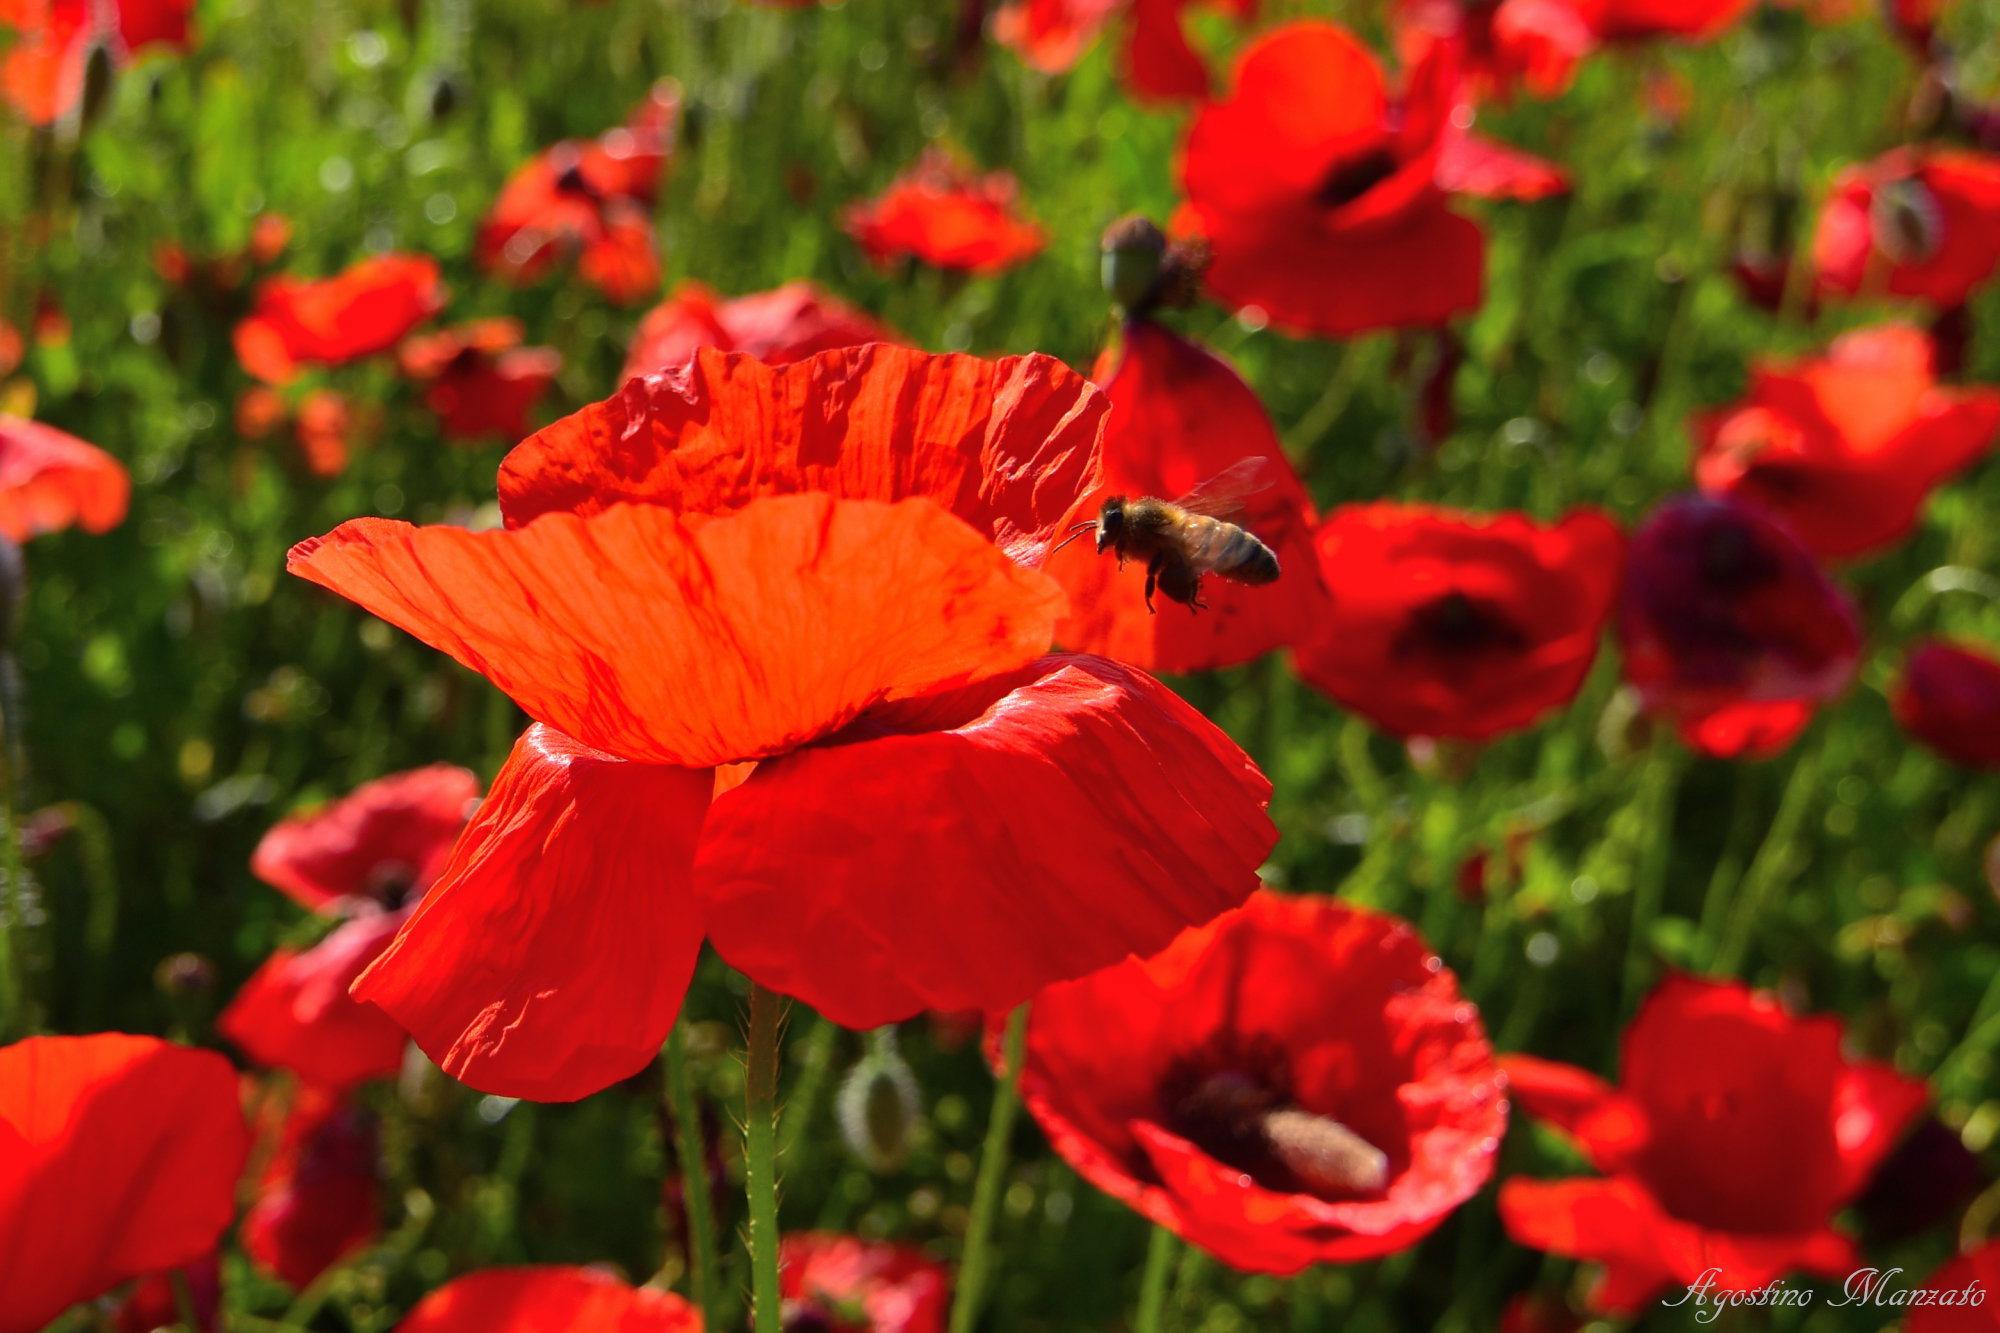 Bees and poppies...